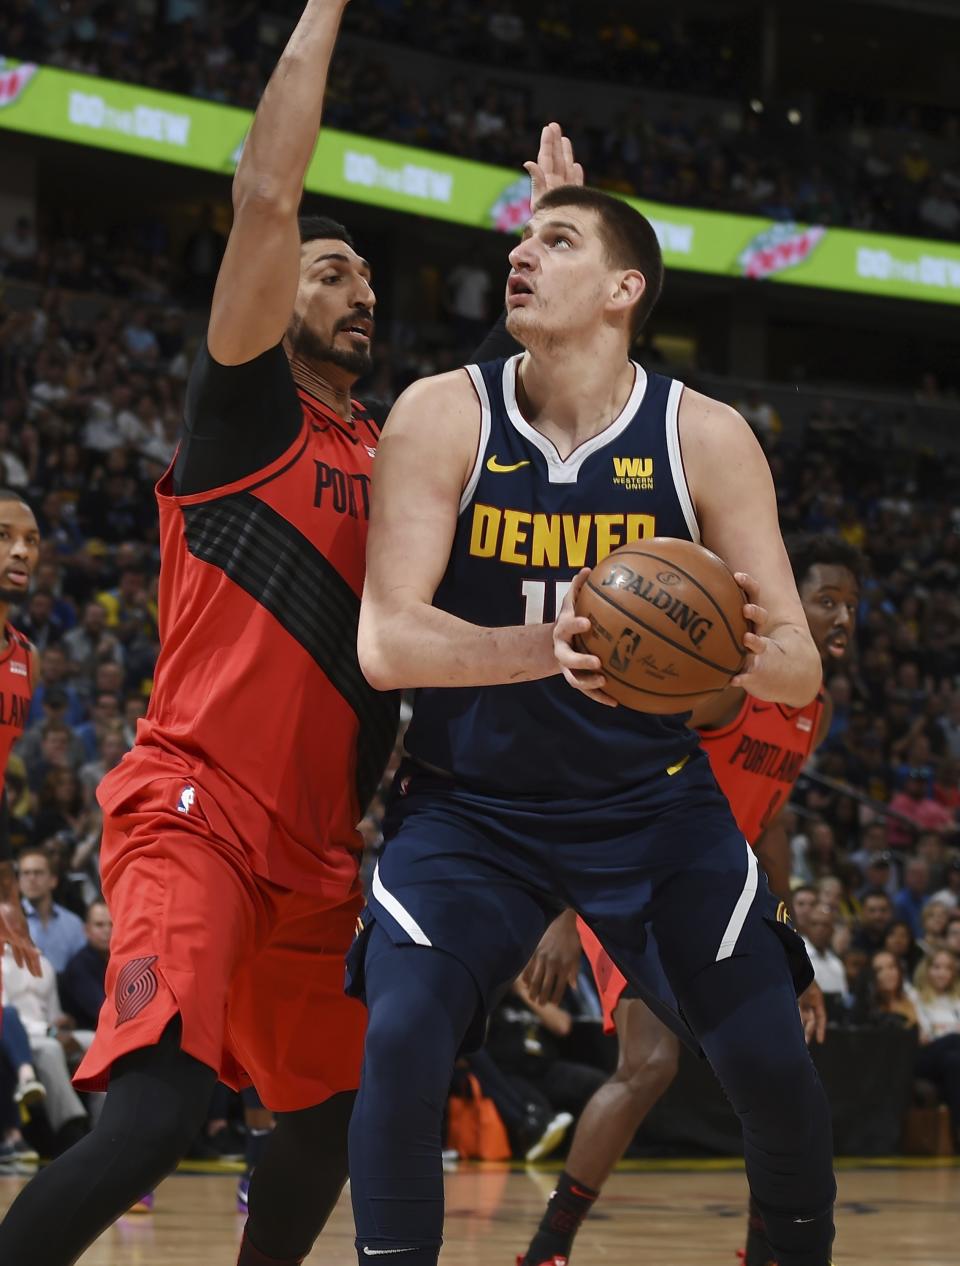 Denver Nuggets center Nikola Jokic, right, goes up for a basket Portland Trail Blazers center Enes Kanter, left, in the first half of Game 7 of an NBA basketball second-round playoff series Sunday, May 12, 2019, in Denver. (AP Photo/John Leyba)